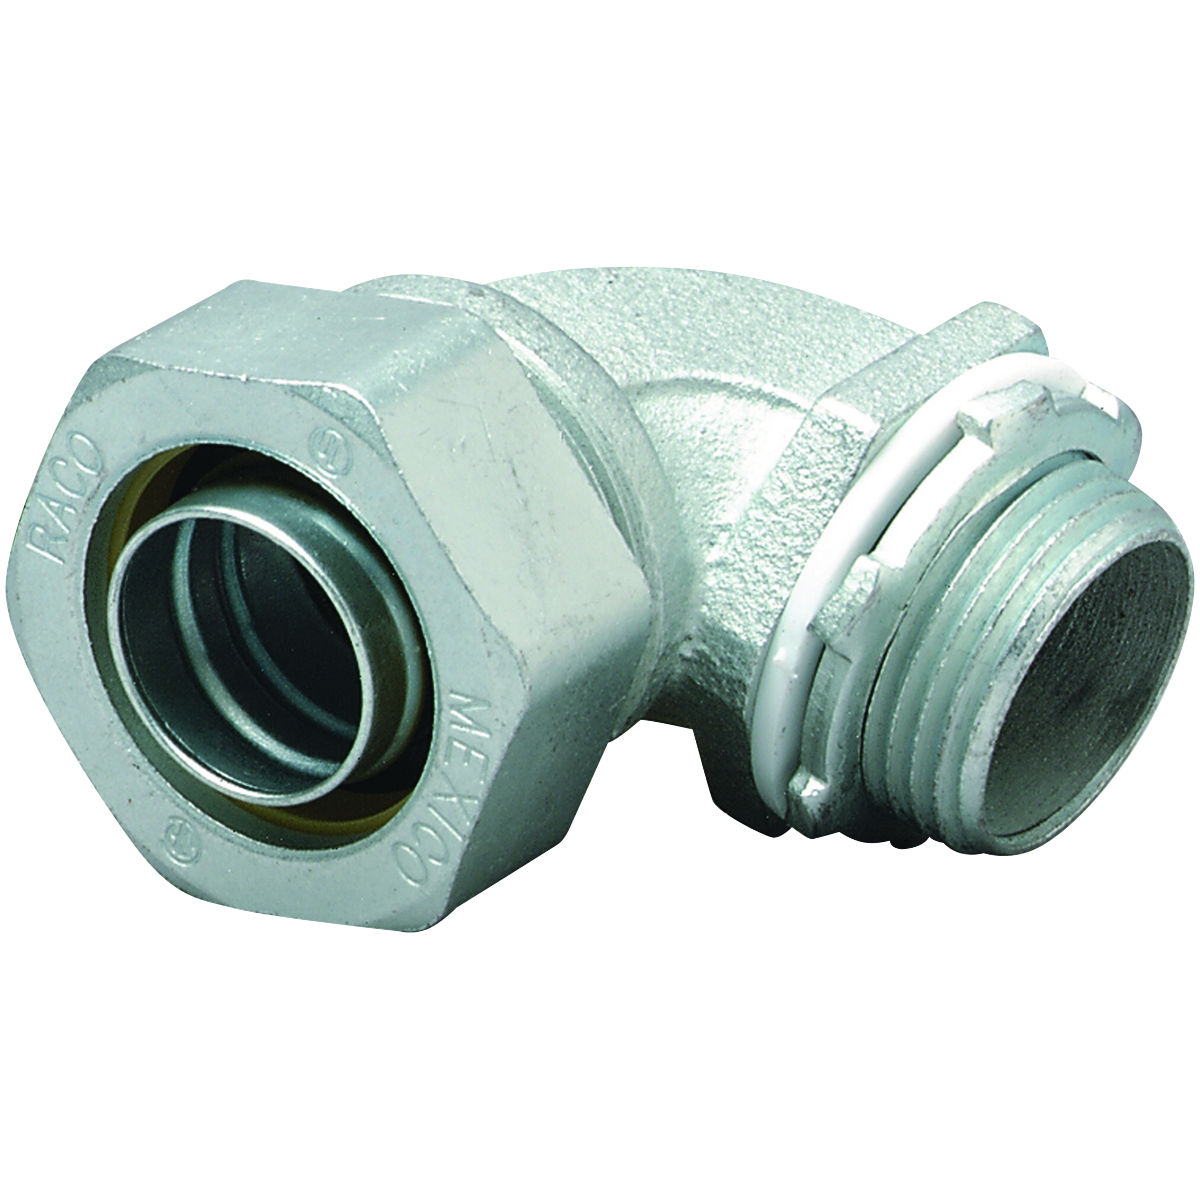 K SERIES FITTINGS - LIQUIDTIGHT CONNECTORS - 90 DEGREE NON-INSULATED -NPT SIZE 4 IN